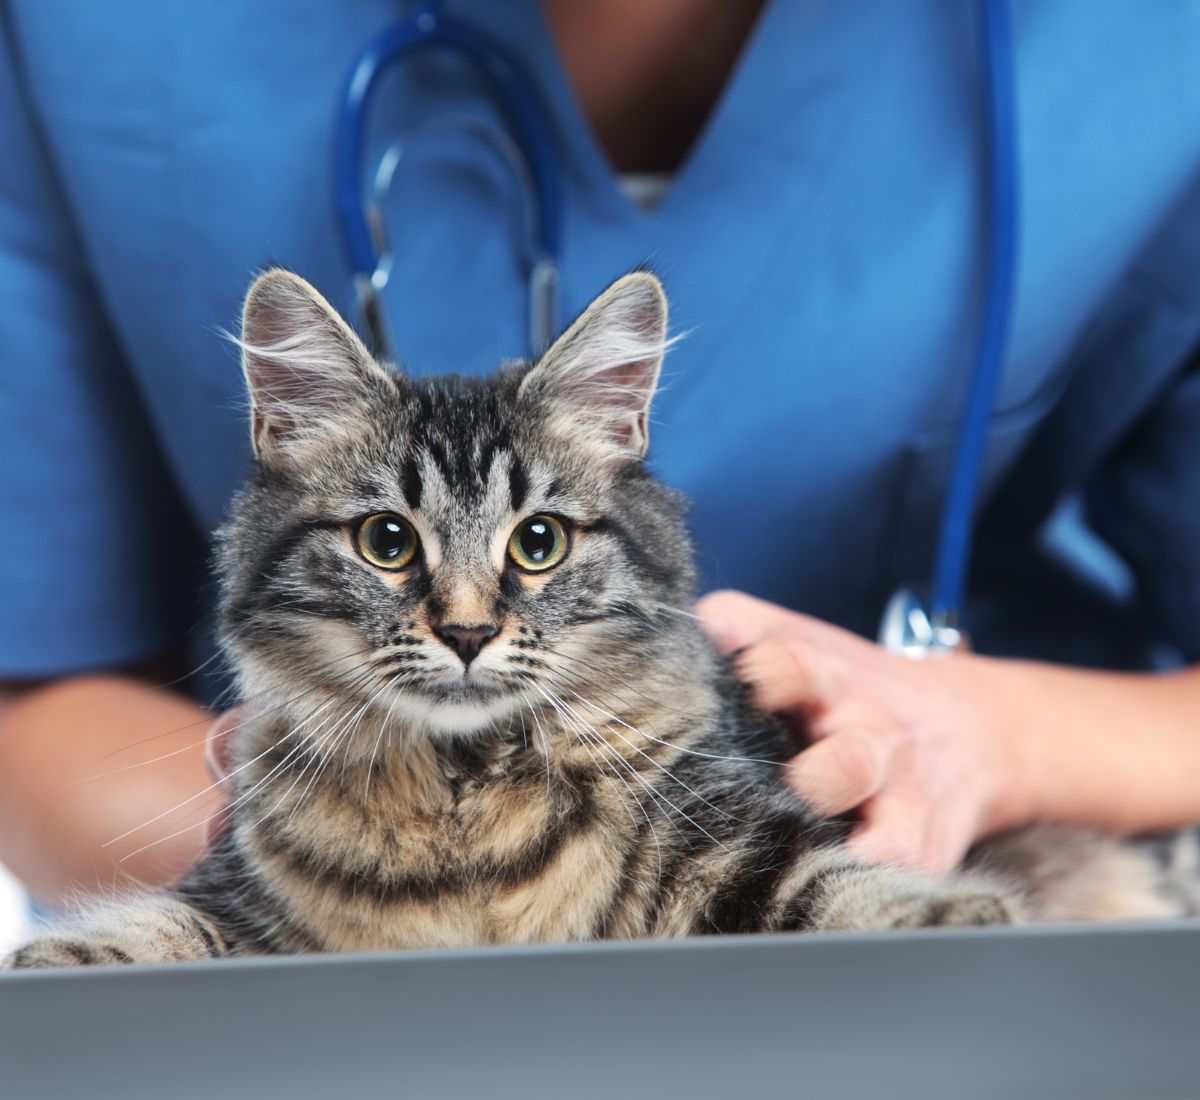 veterinarian holding cat on a table